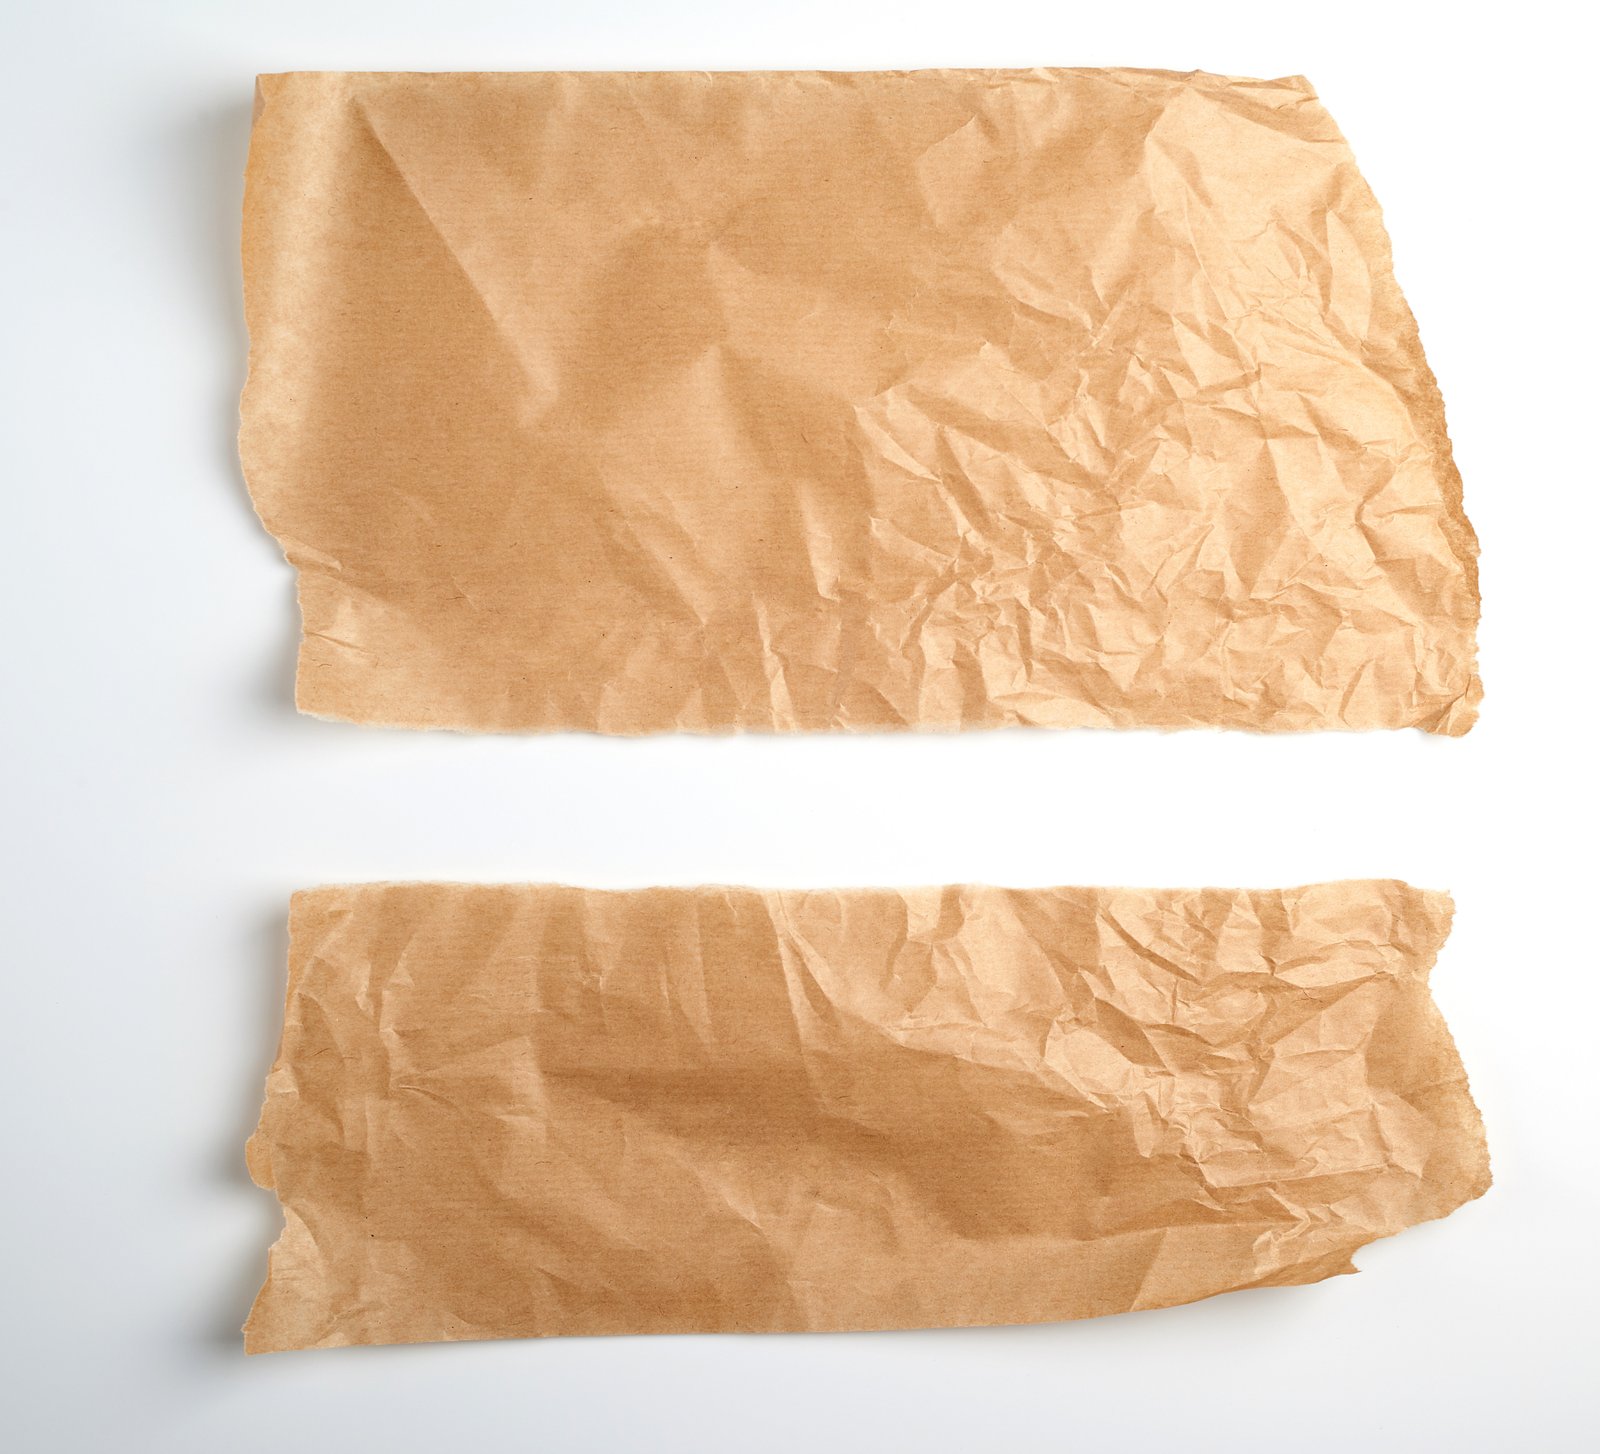 Can You Compost Parchment Paper? (If Yes, Then How?)